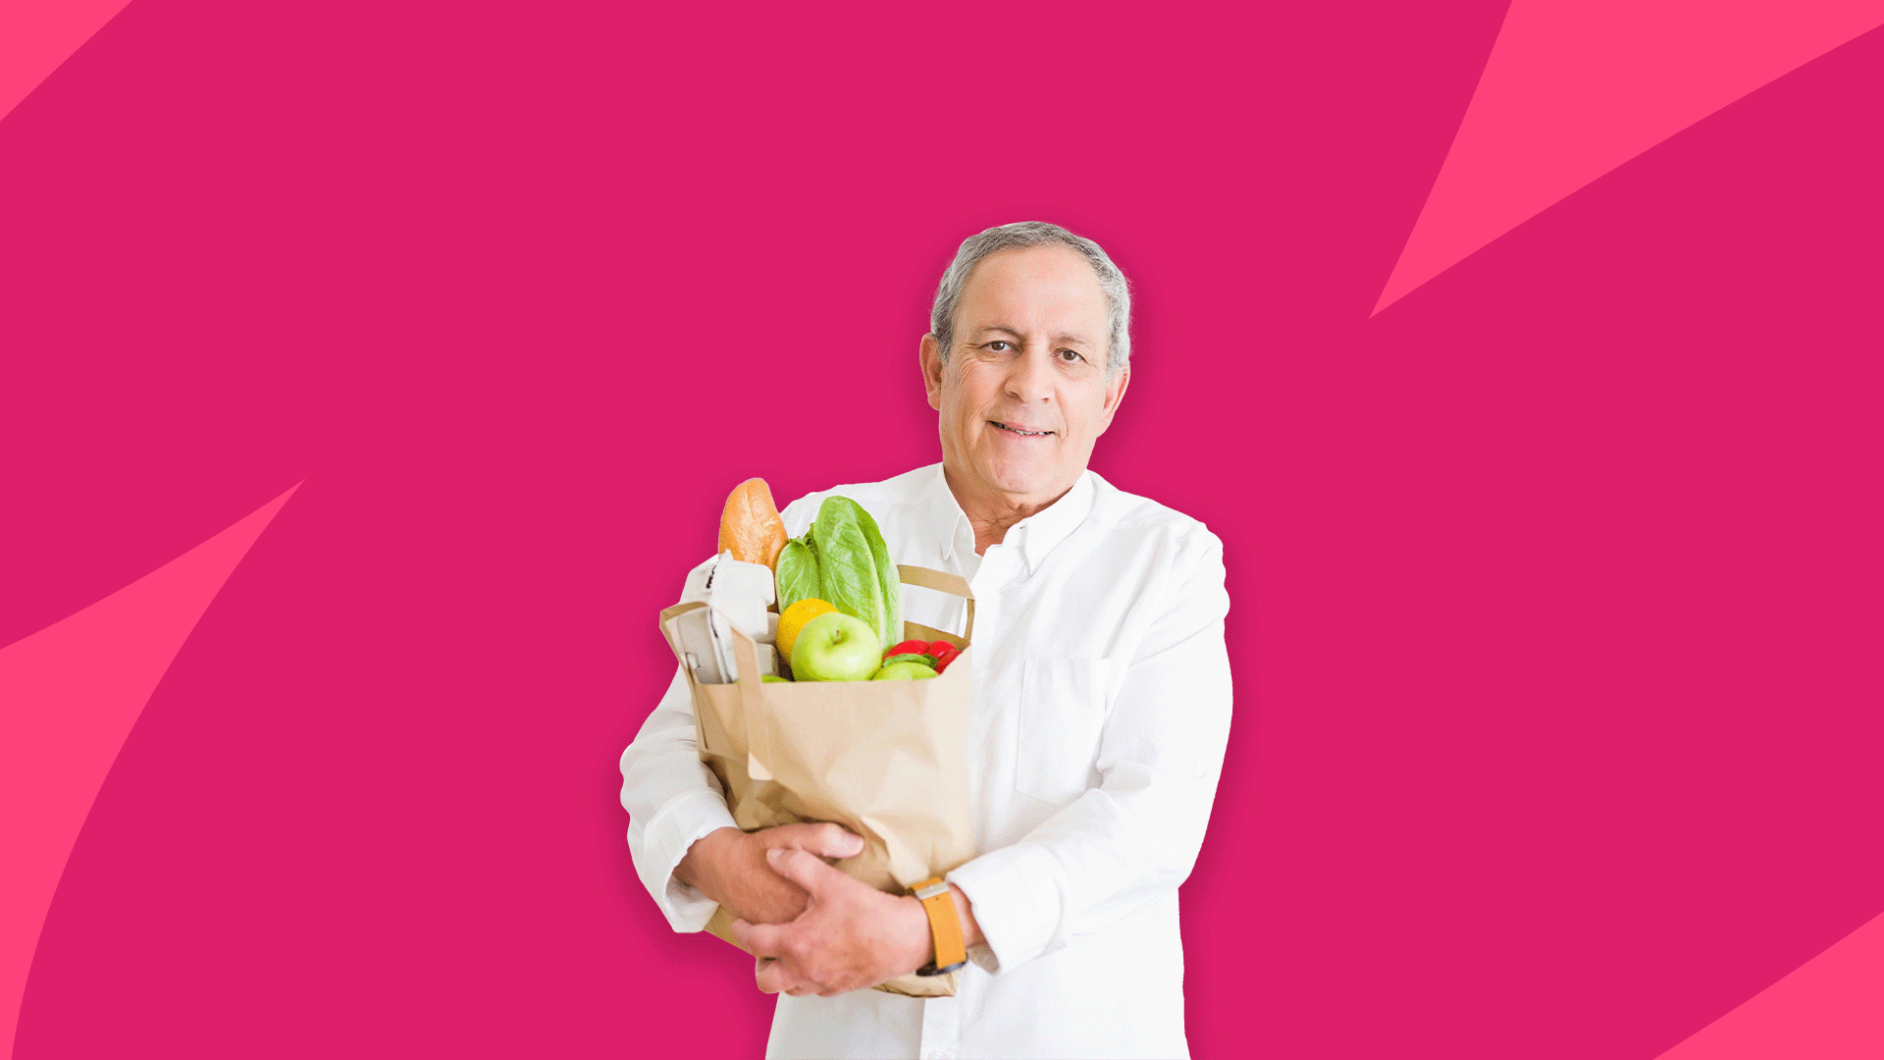 A doctor holding a bag of groceries: Foods that boost testosterone